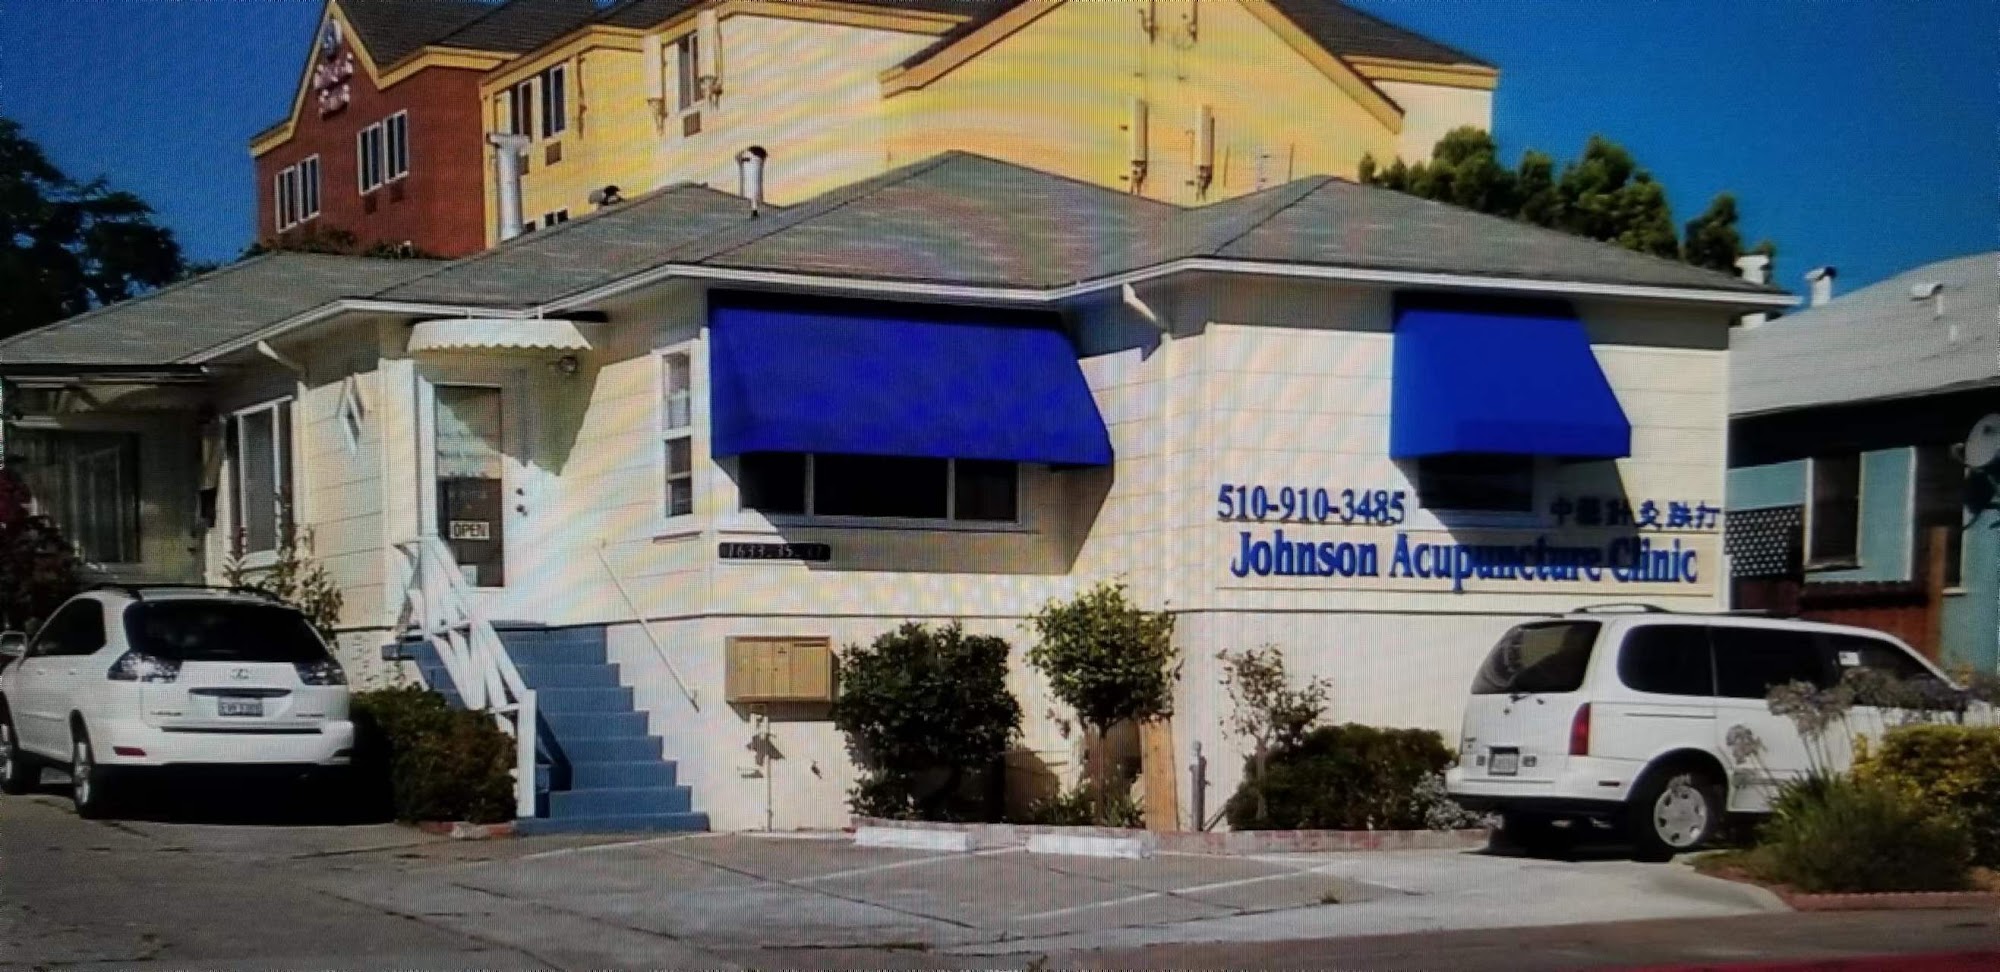 Johnson Acupuncture Clinic